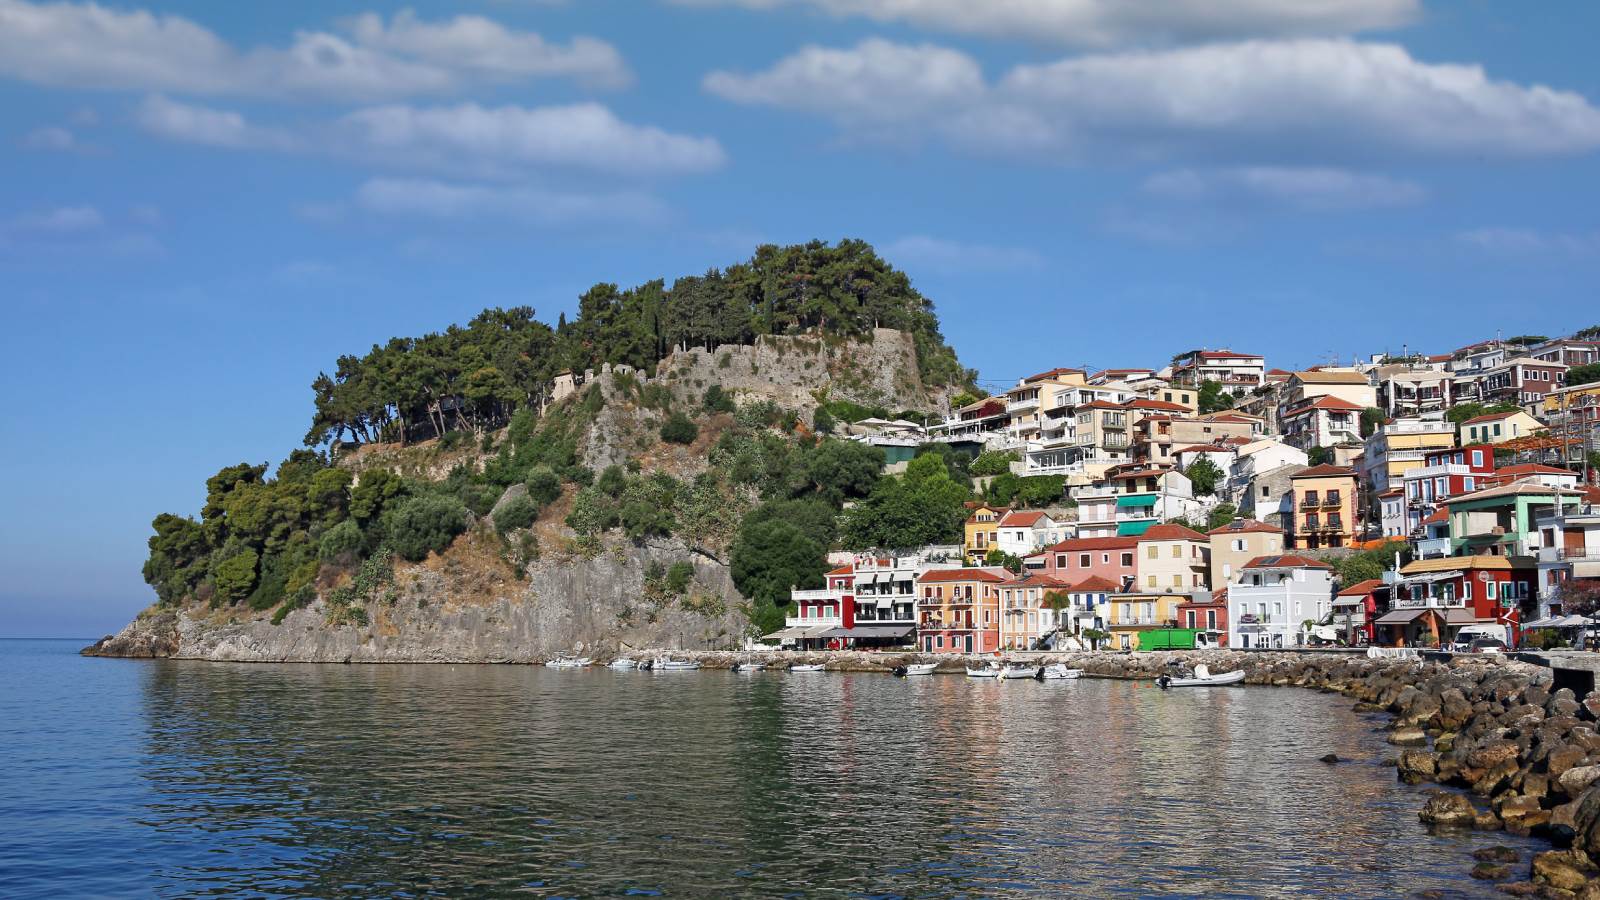 Preveza - Parga: The land of victory